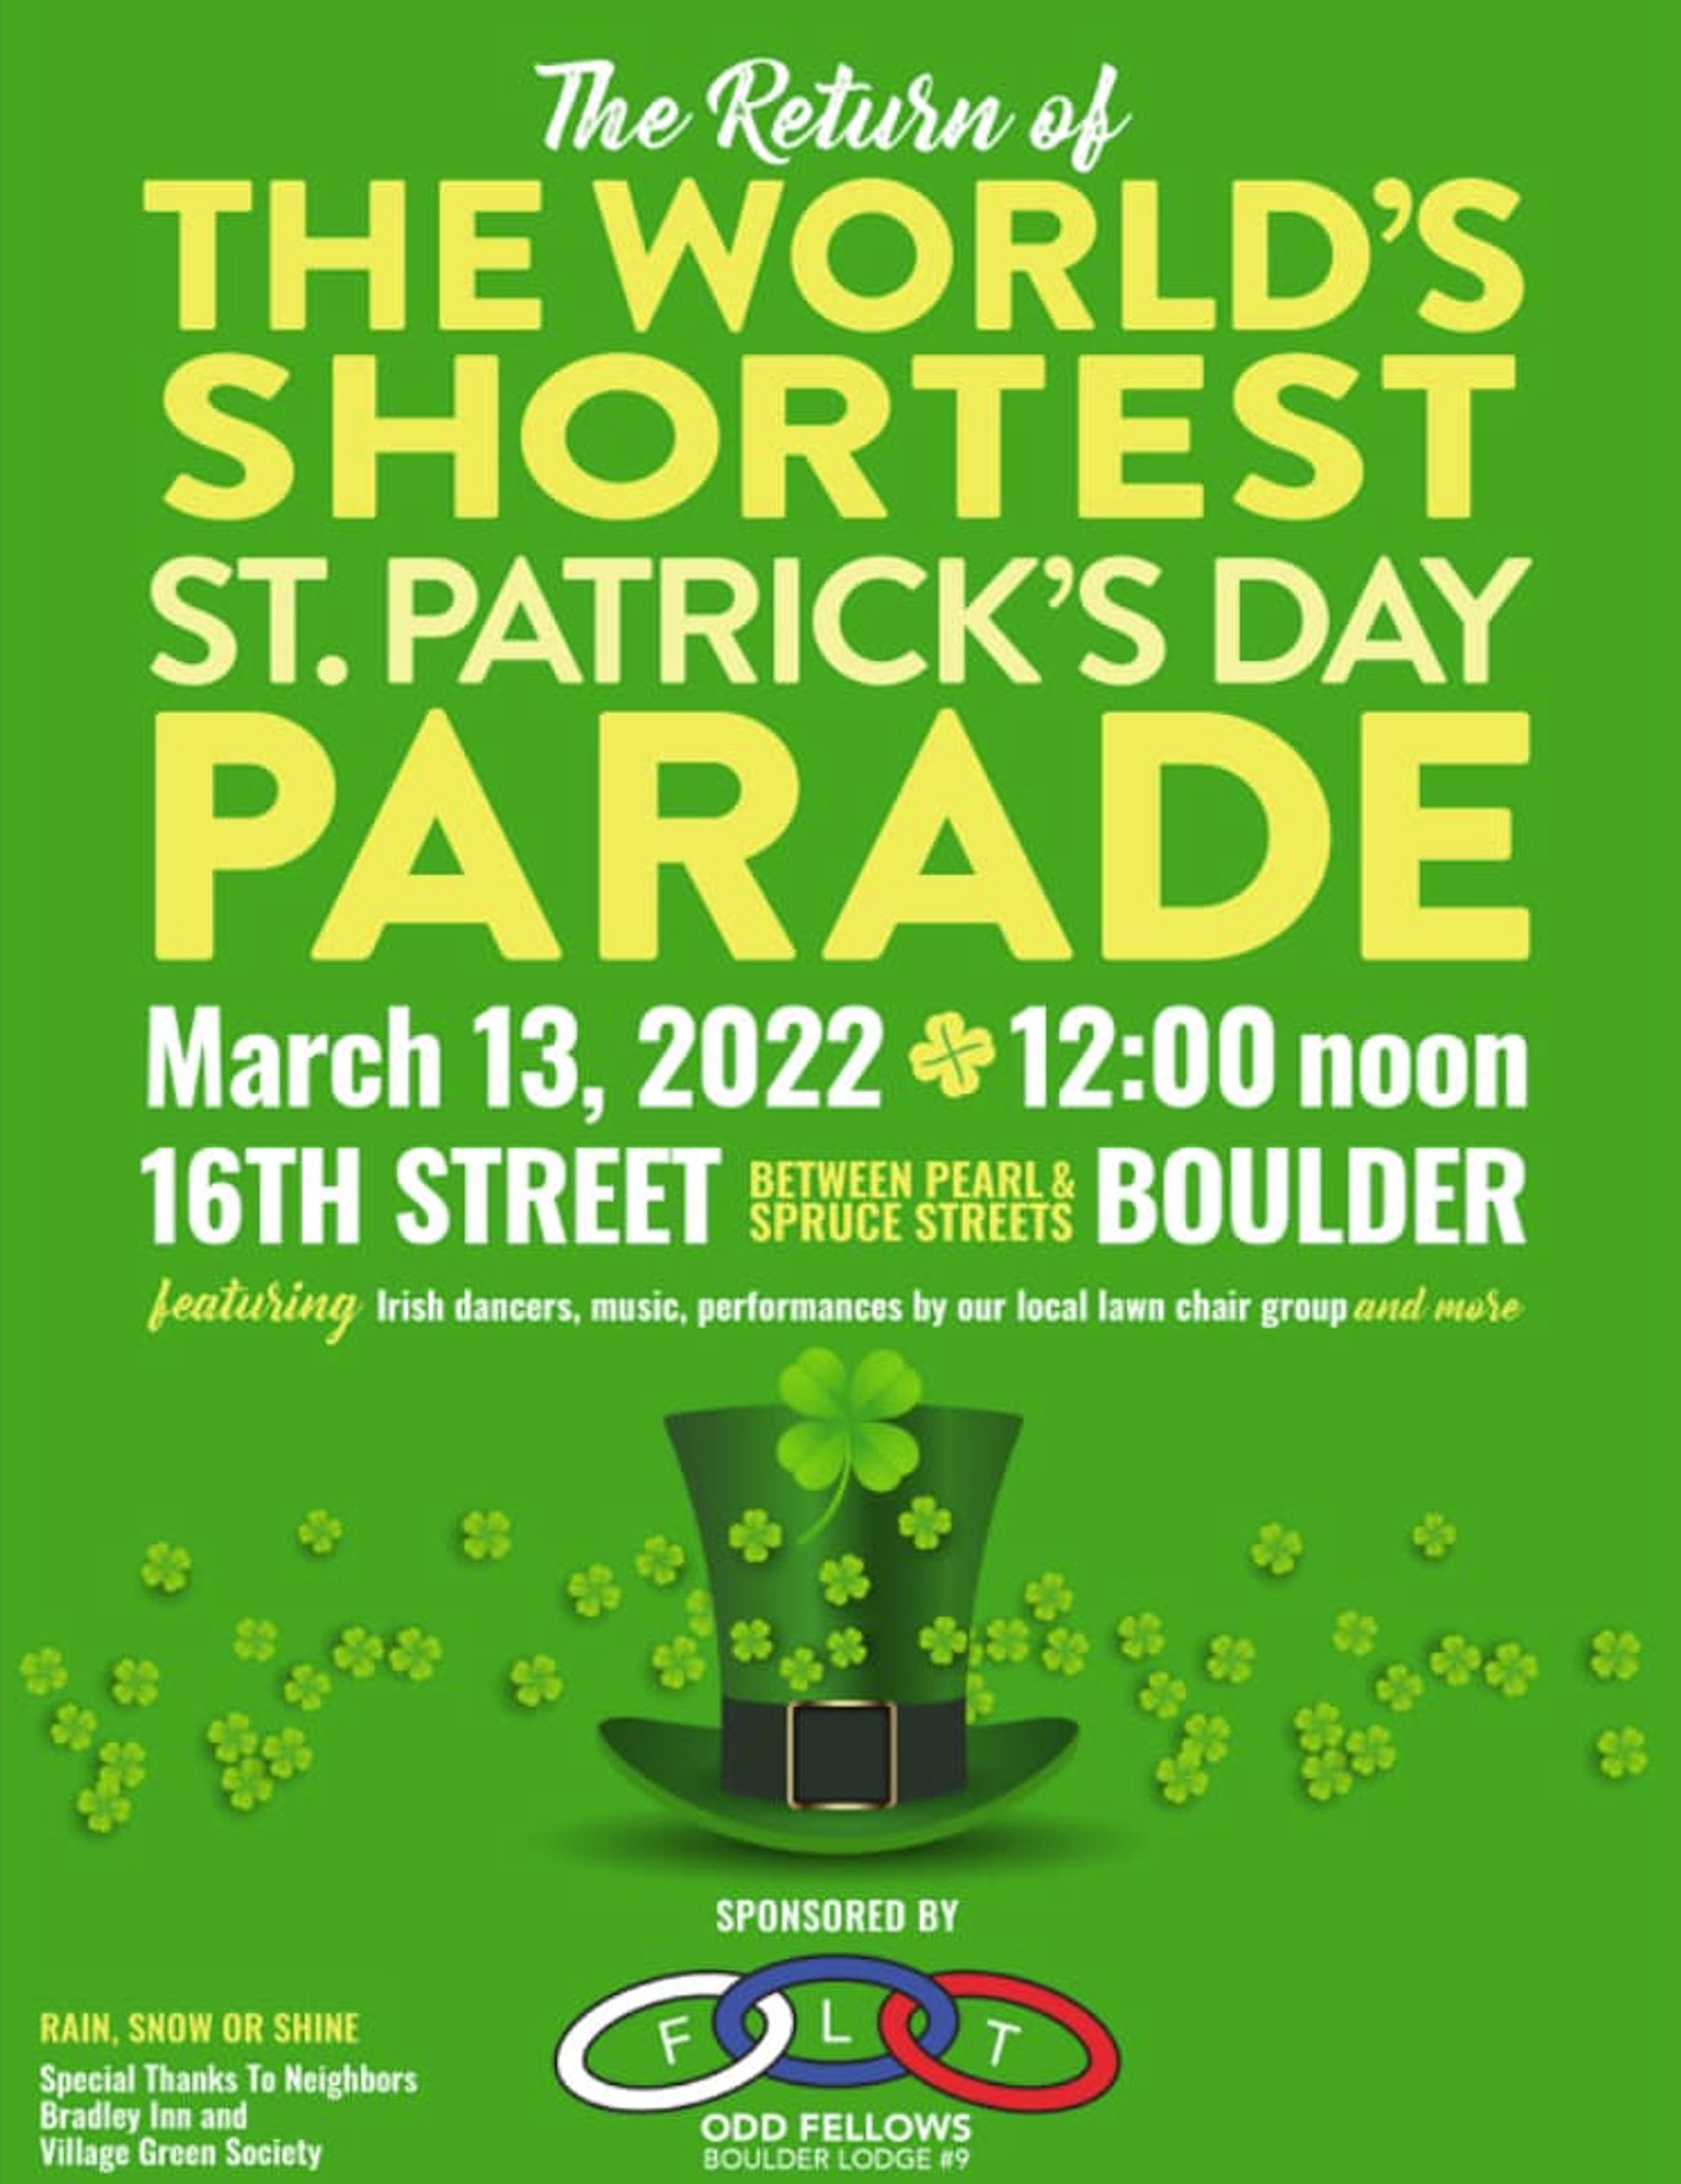 The World's Shortest St. Patrick's Day Parade Downtown Boulder, CO